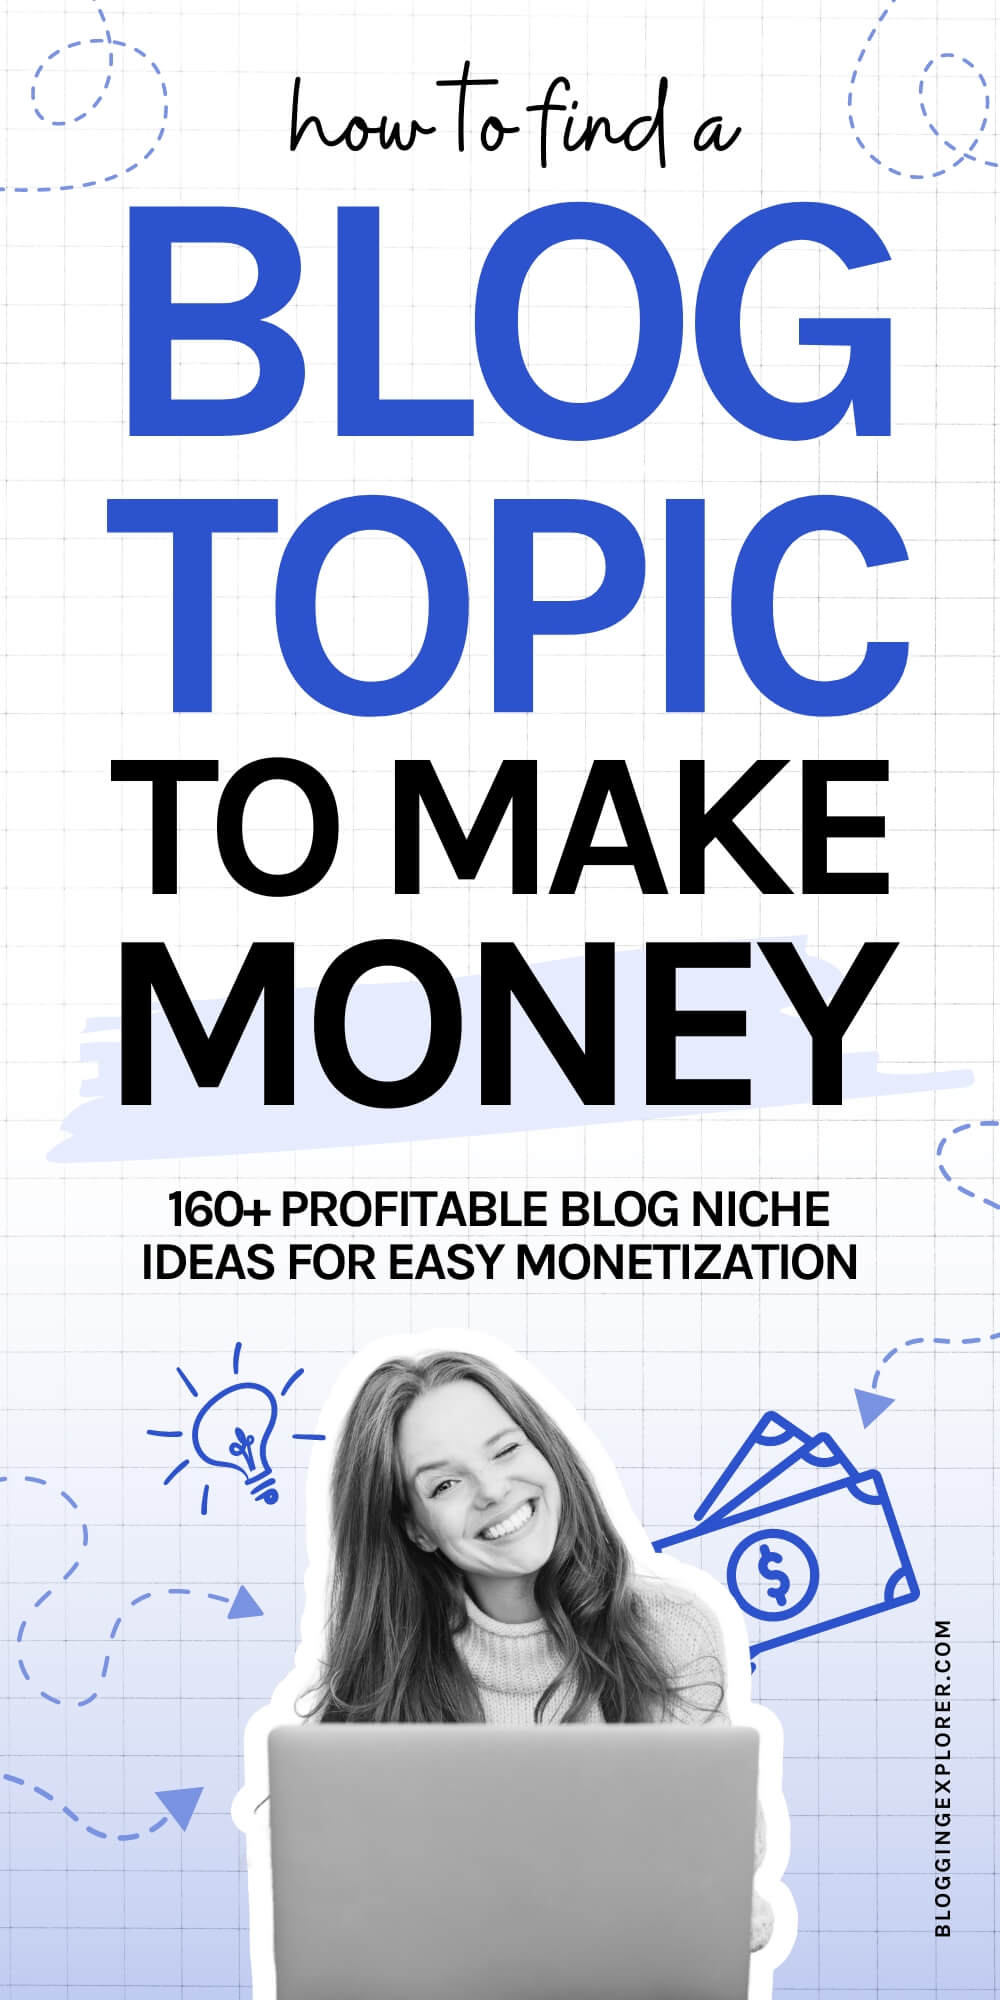 How to find a blog topic to make money – Profitable blog niche ideas for easy monetization